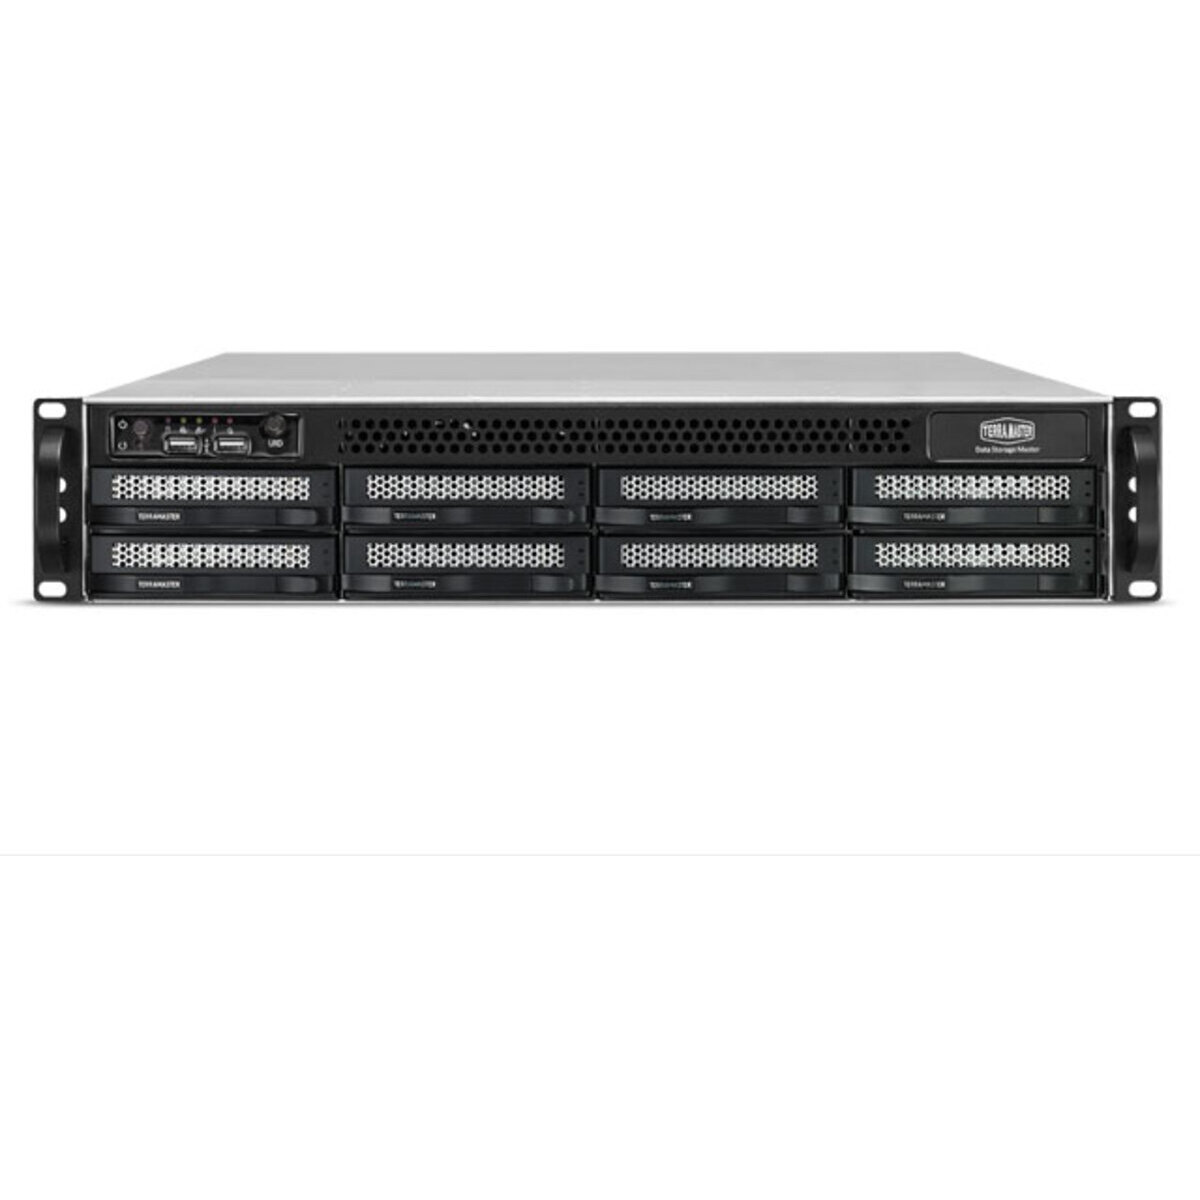 TerraMaster U8-722-2224 64tb 8-Bay RackMount Large Business / Enterprise NAS - Network Attached Storage Device 8x8tb TeamGroup EX2 Elite T253E2008T0C101 2.5 550/520MB/s SATA 6Gb/s SSD CONSUMER Class Drives Installed - Burn-In Tested U8-722-2224